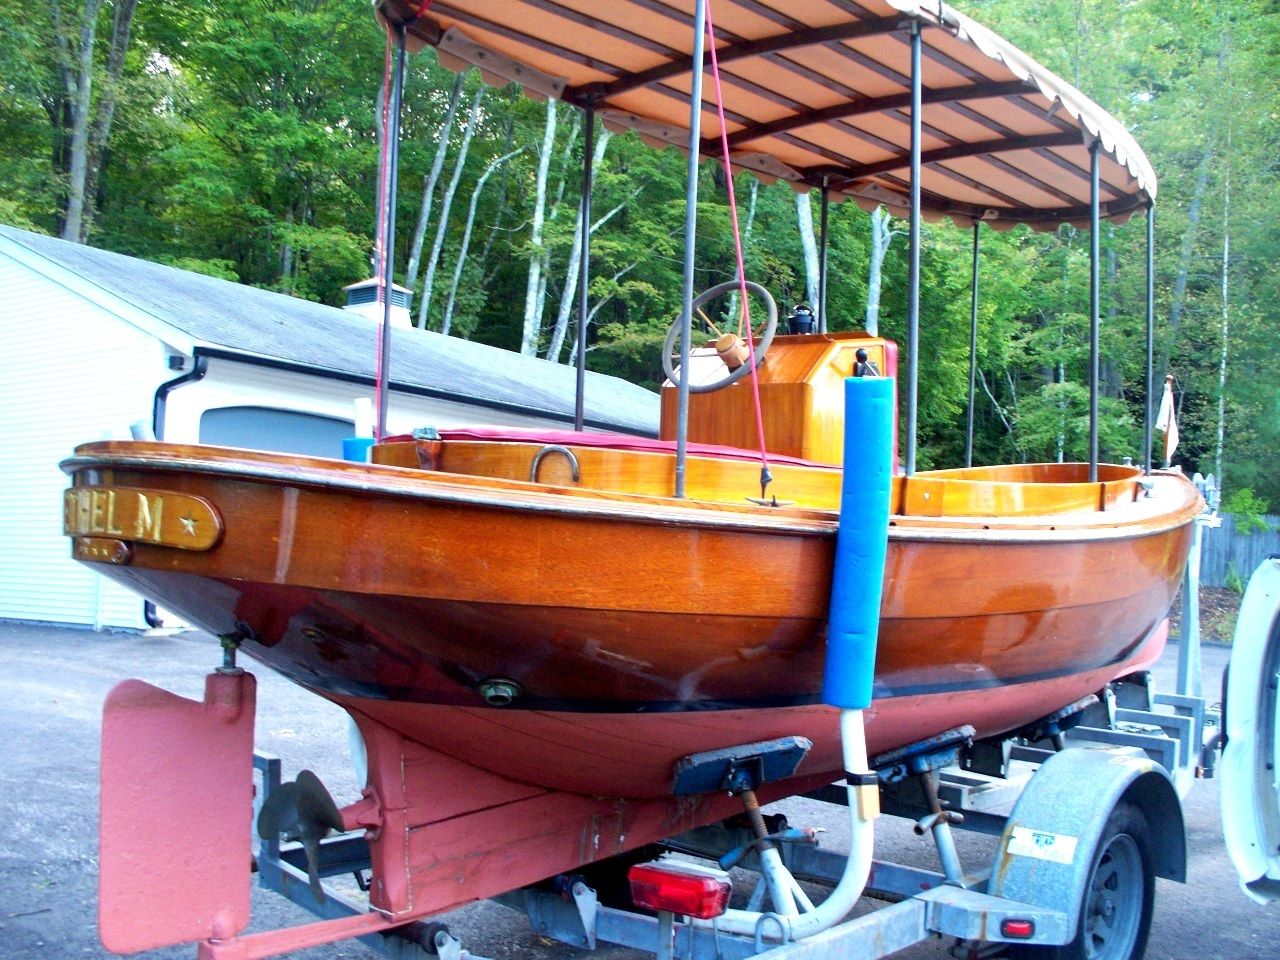 Joseph Crosby Fantail Launch 1983 for sale for $20,000 